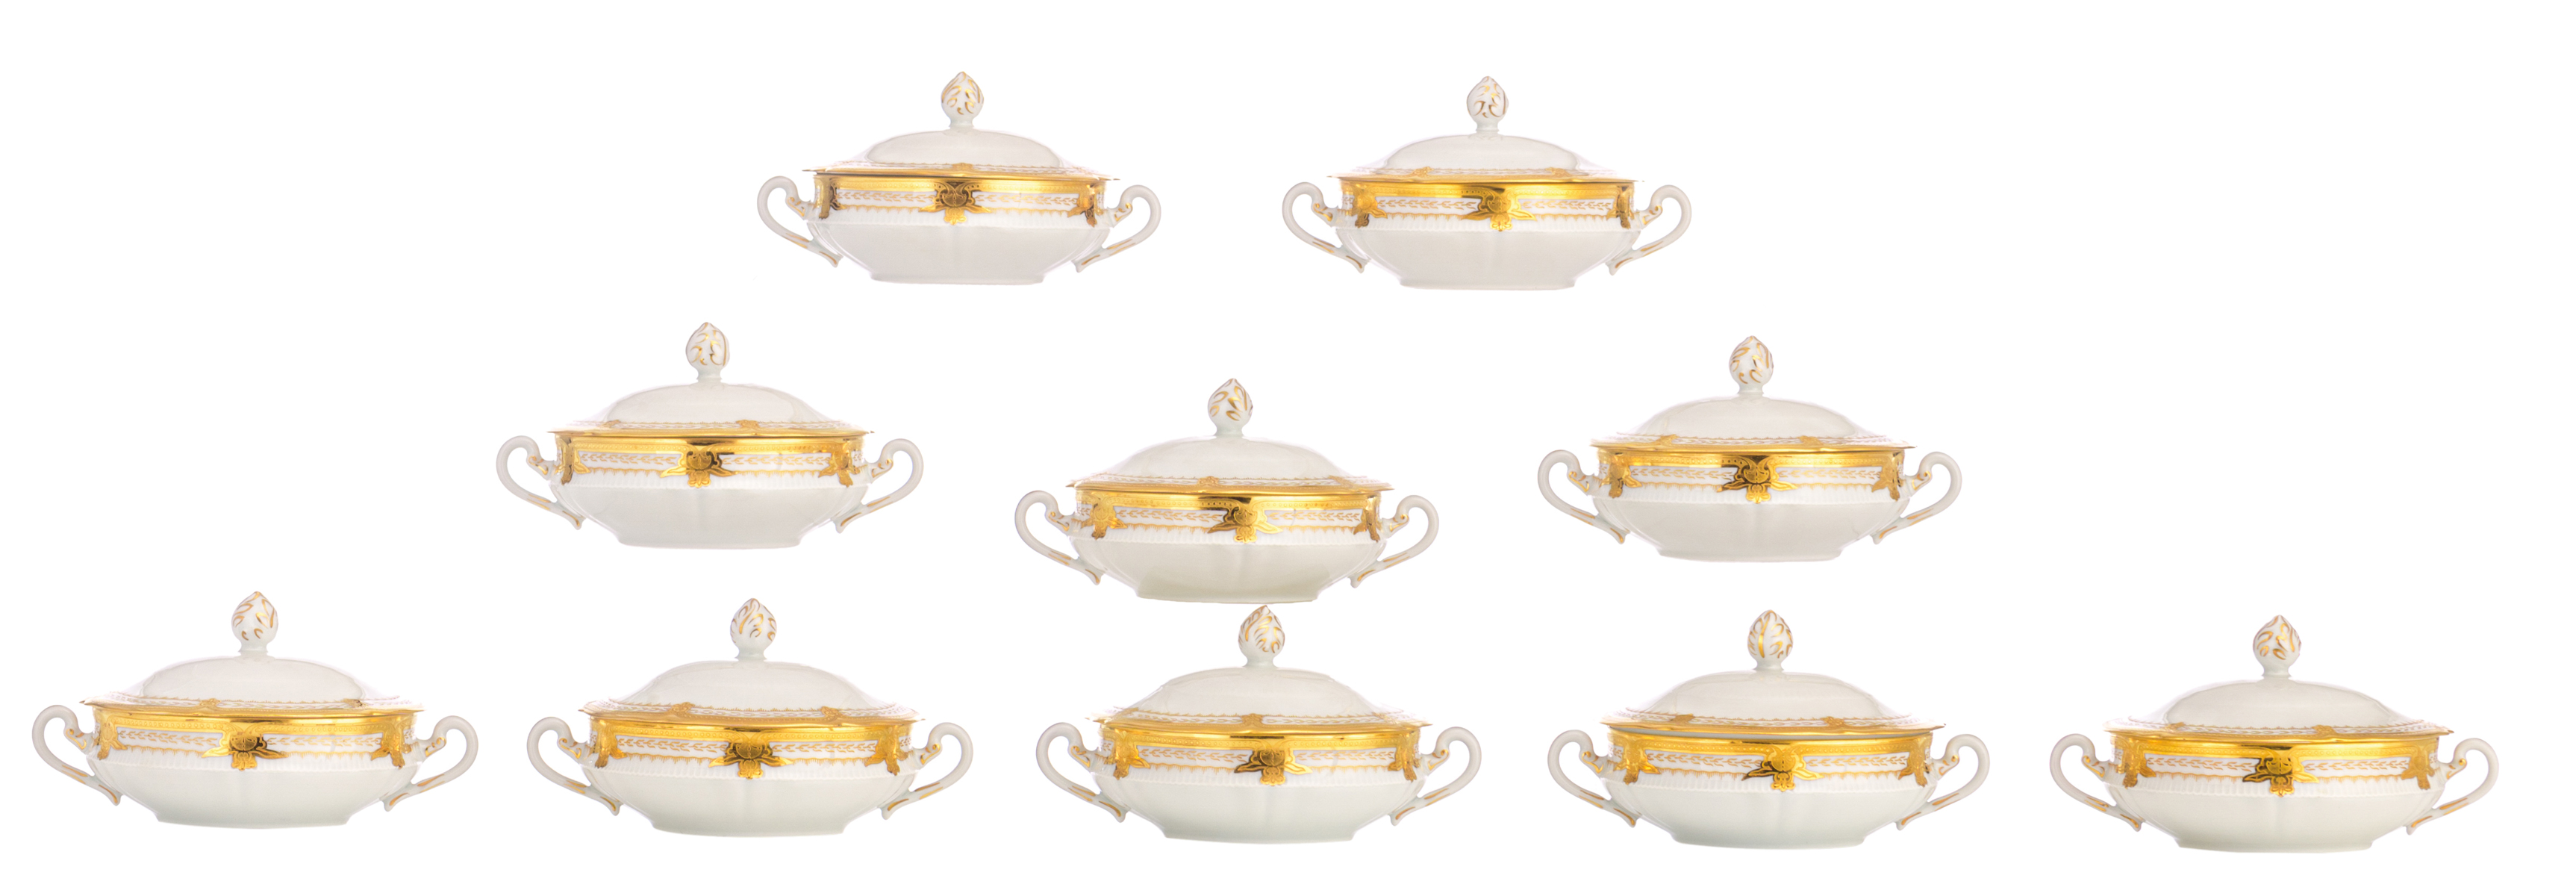 A completely gilt decorated Limoges porcelain dinner and coffee service, marked 'Haviland France', 2 - Image 5 of 10